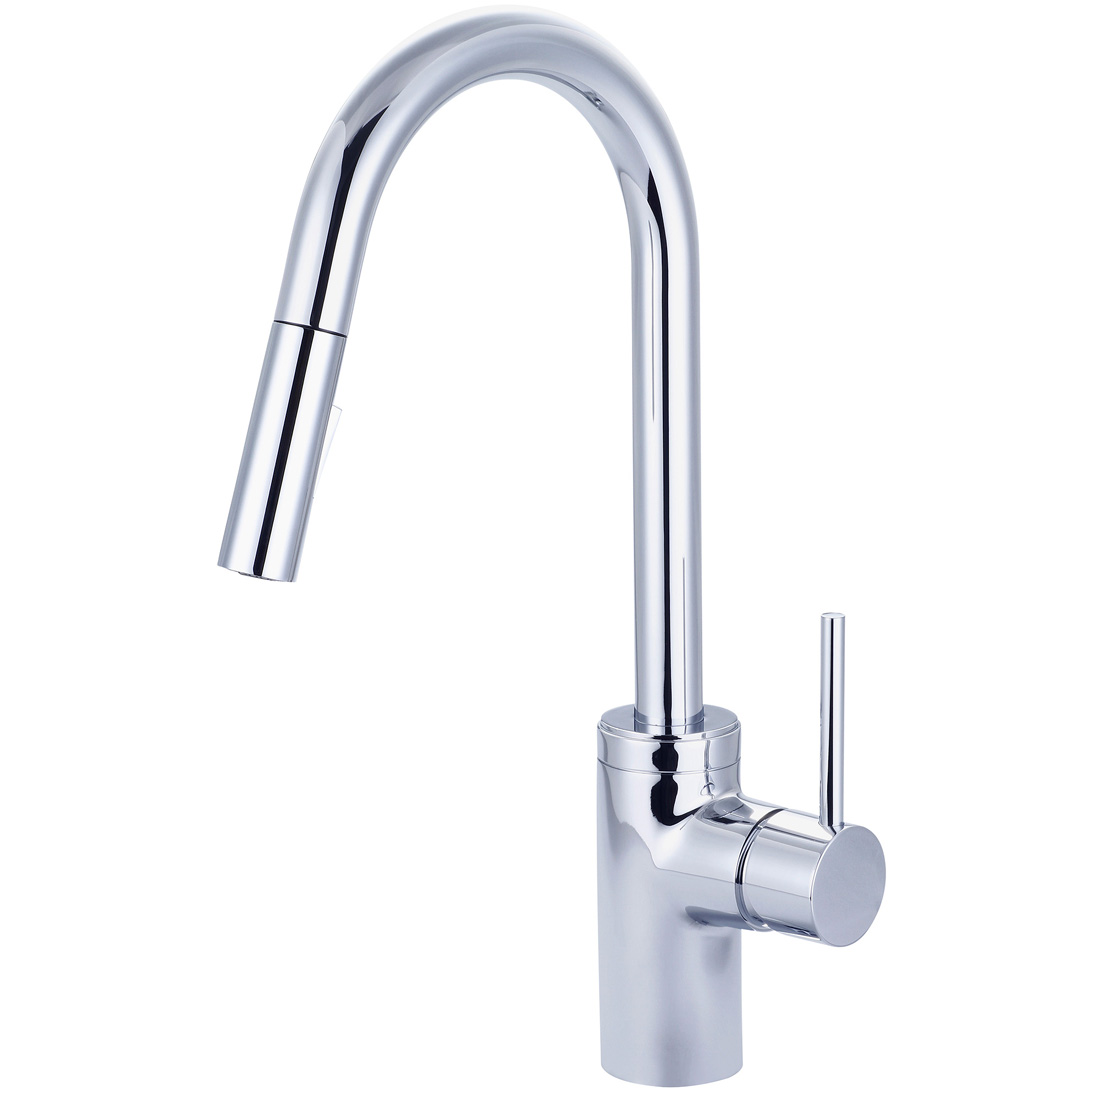 PIONEER 2DM301 TWO HANDLE KITCHEN FAUCET W/SPRAYER PVD BRUSHED NICKEL *A1 